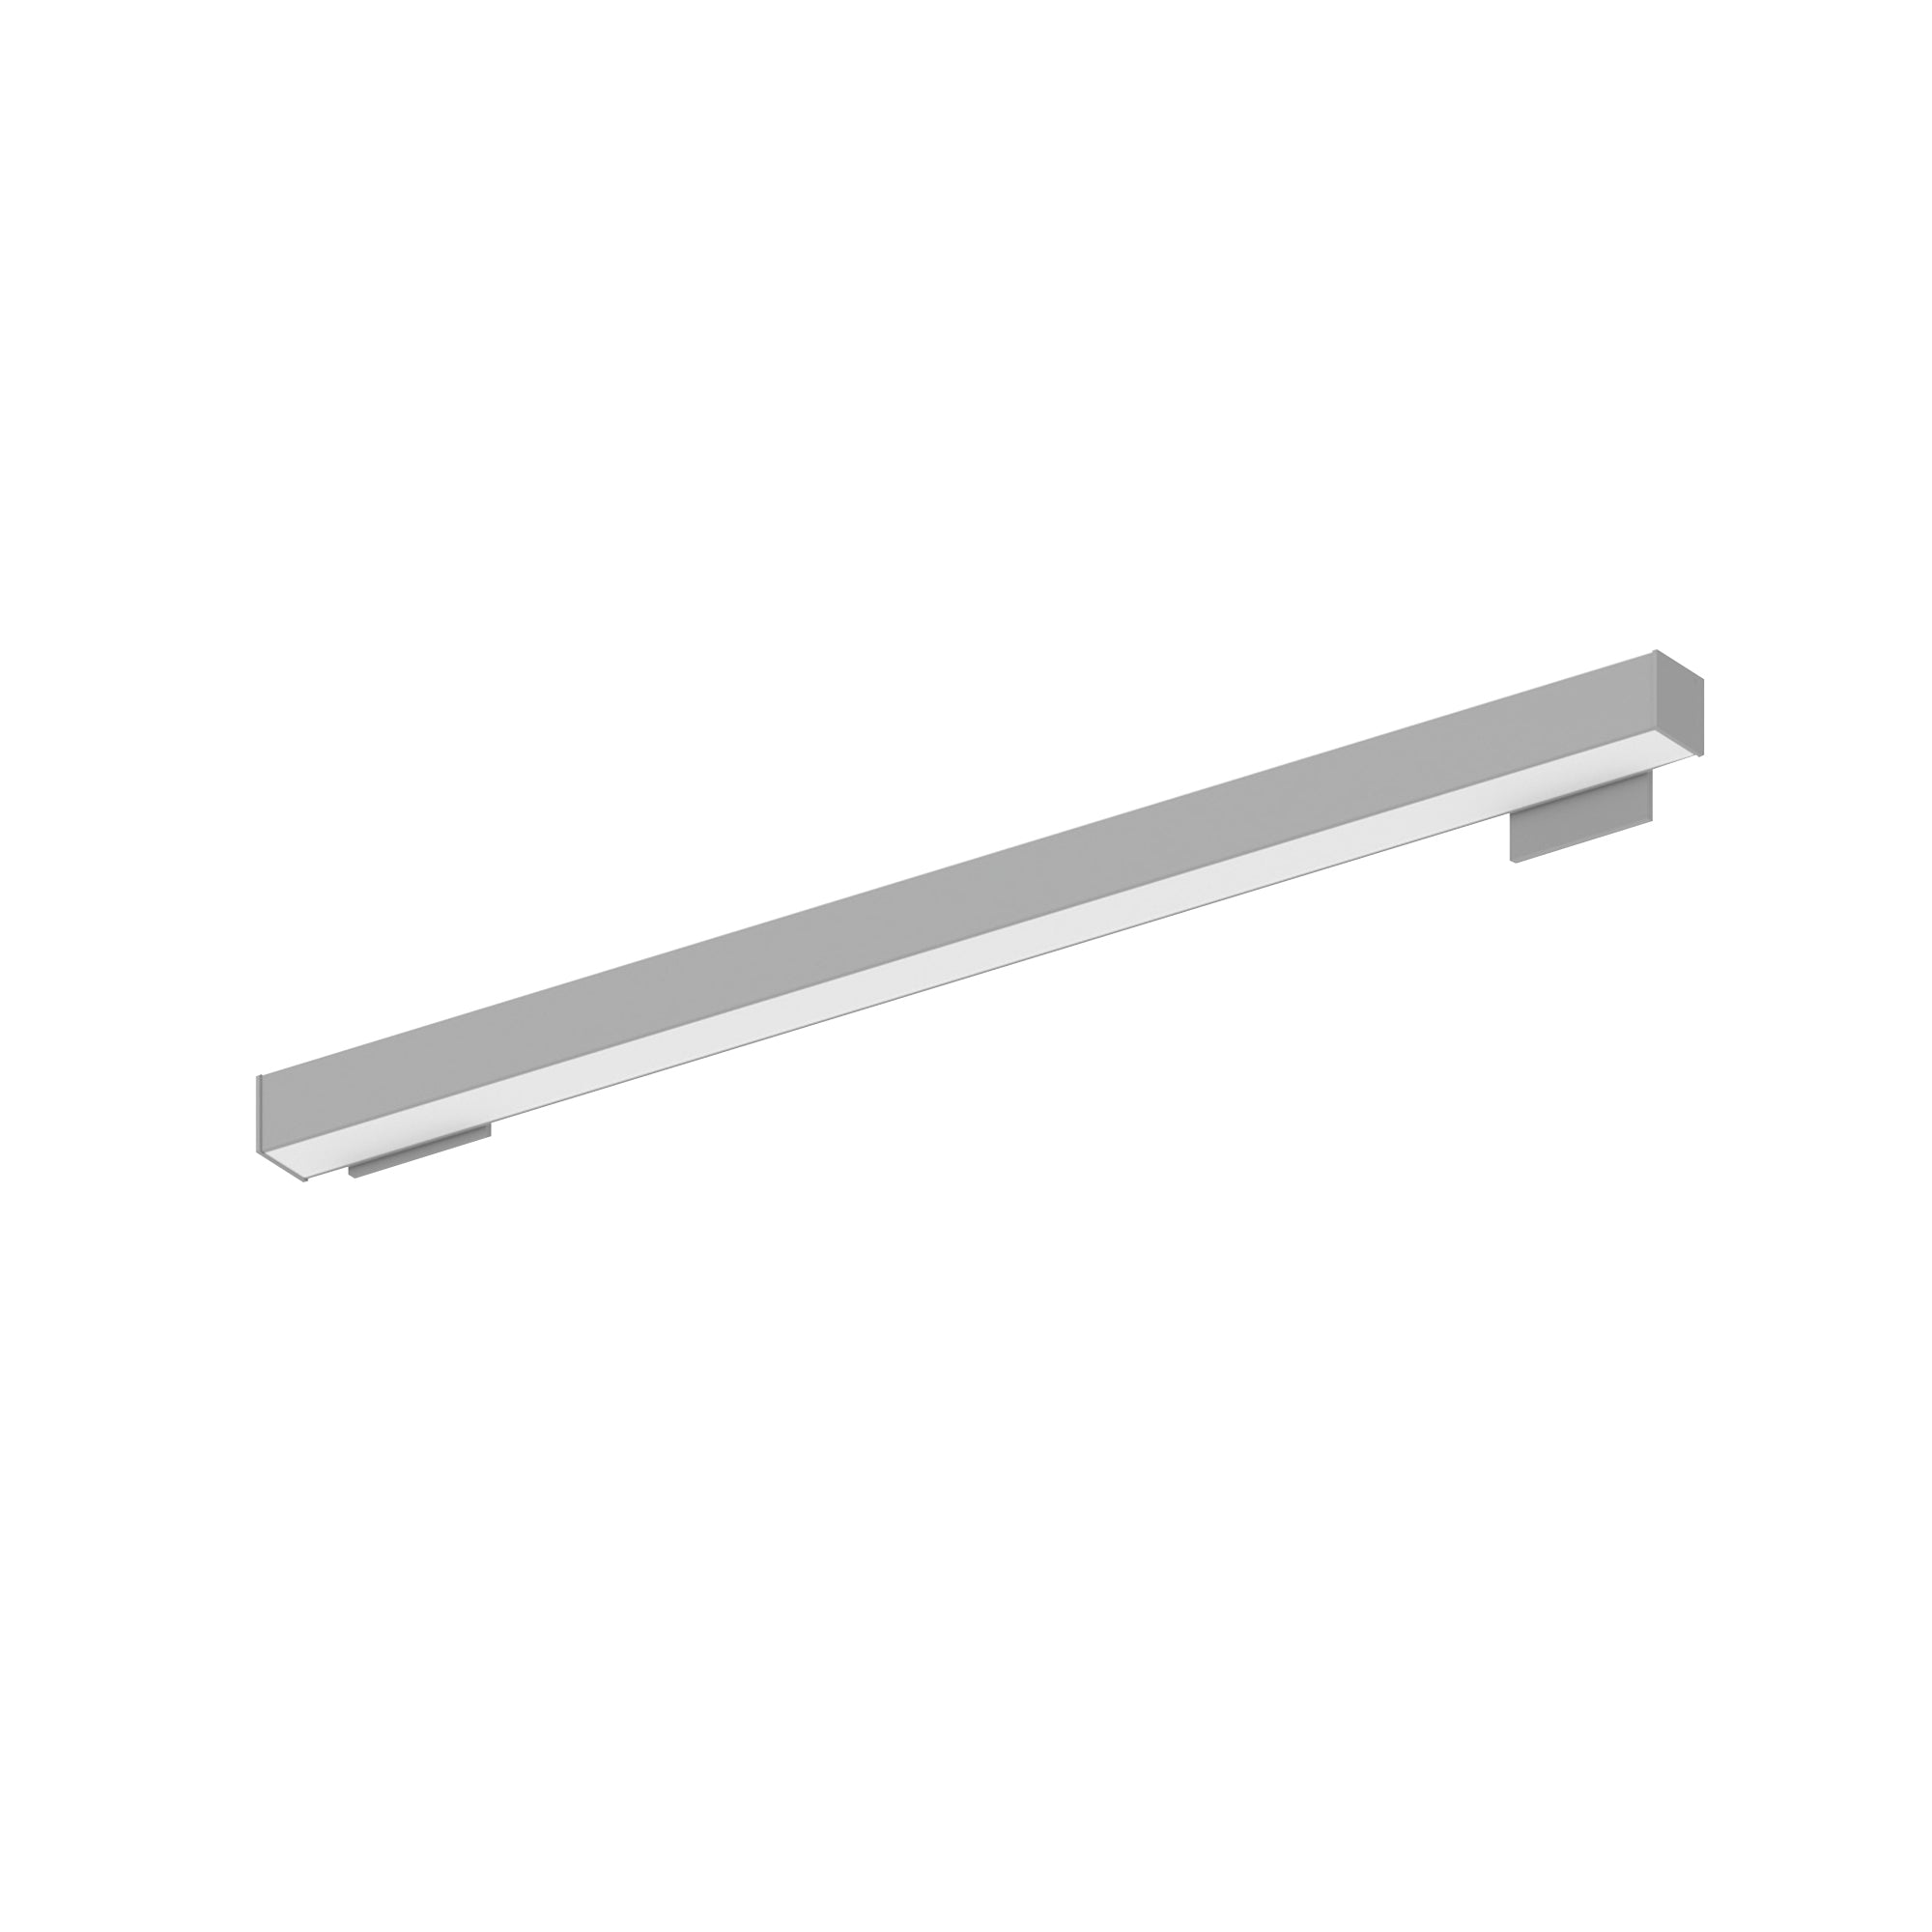 Nora Lighting NWLIN-41040A/L2P-R4 - Linear - 4' L-Line LED Wall Mount Linear, 4200lm / 4000K, 2 Inchx4 Inch Left Plate & 4 Inchx4 Inch Right Plate, Left Power Feed, Aluminum Finish